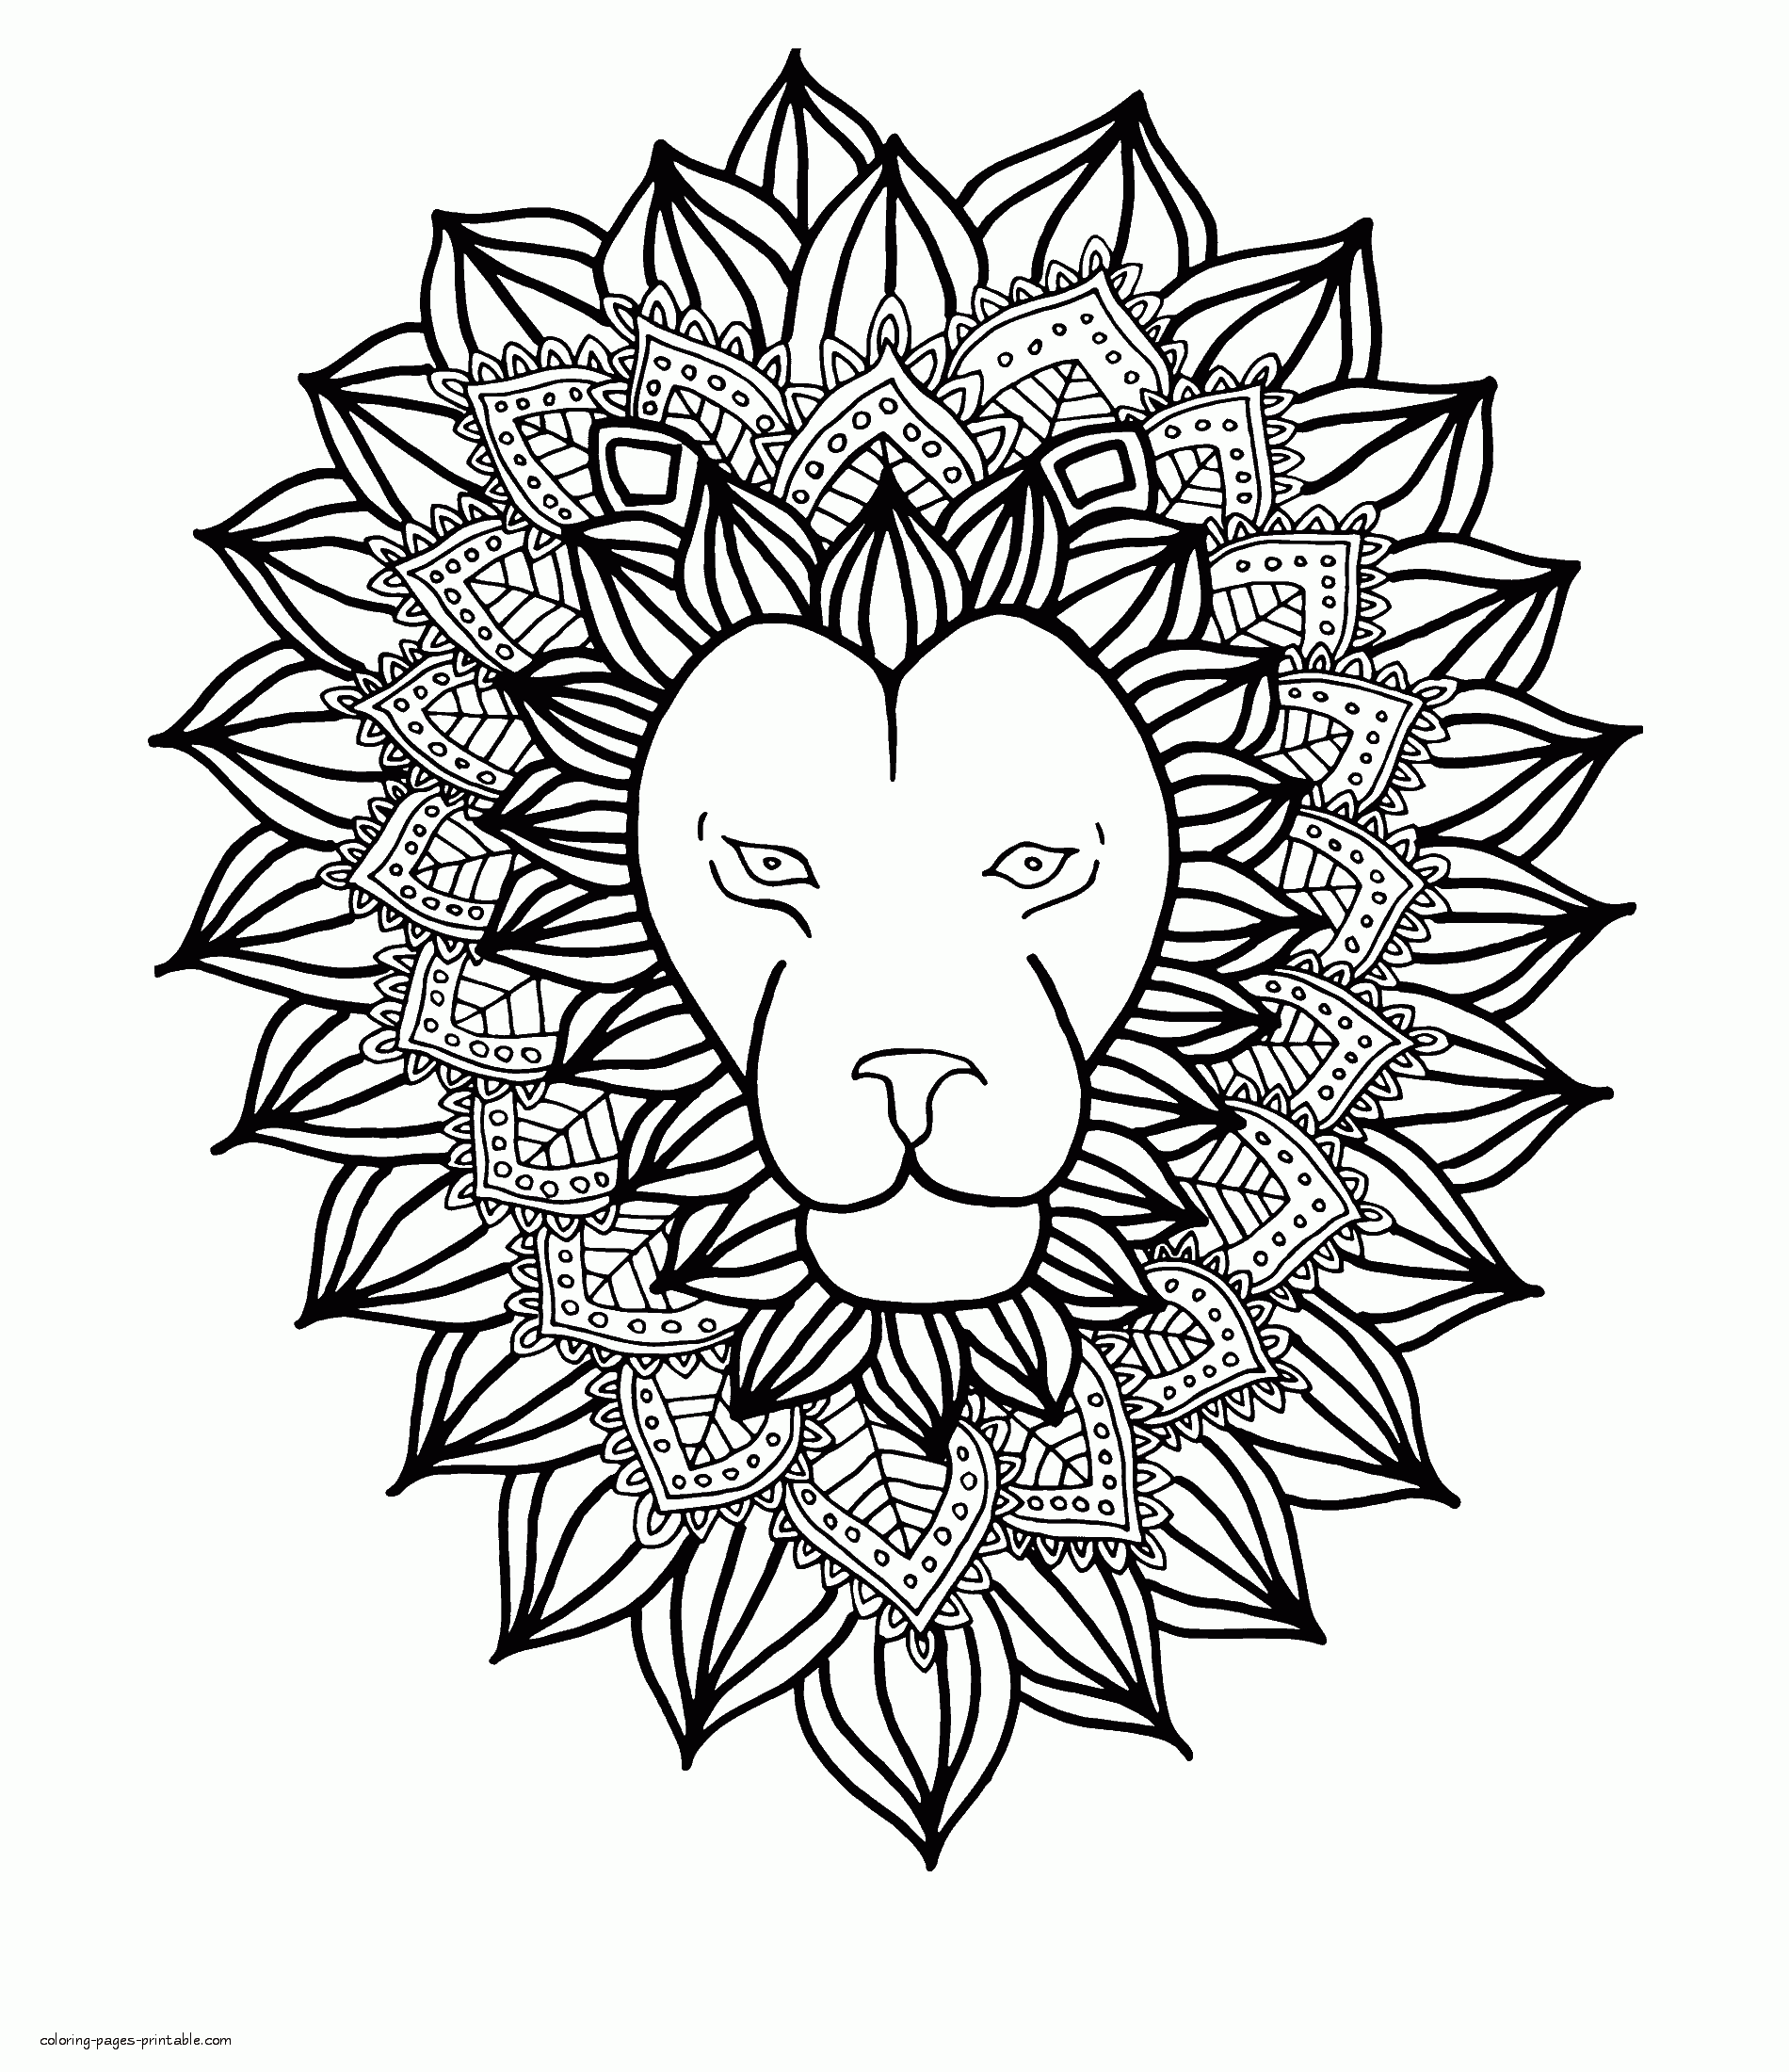 Lion Coloring Pages For Adults || COLORING-PAGES-PRINTABLE.COM